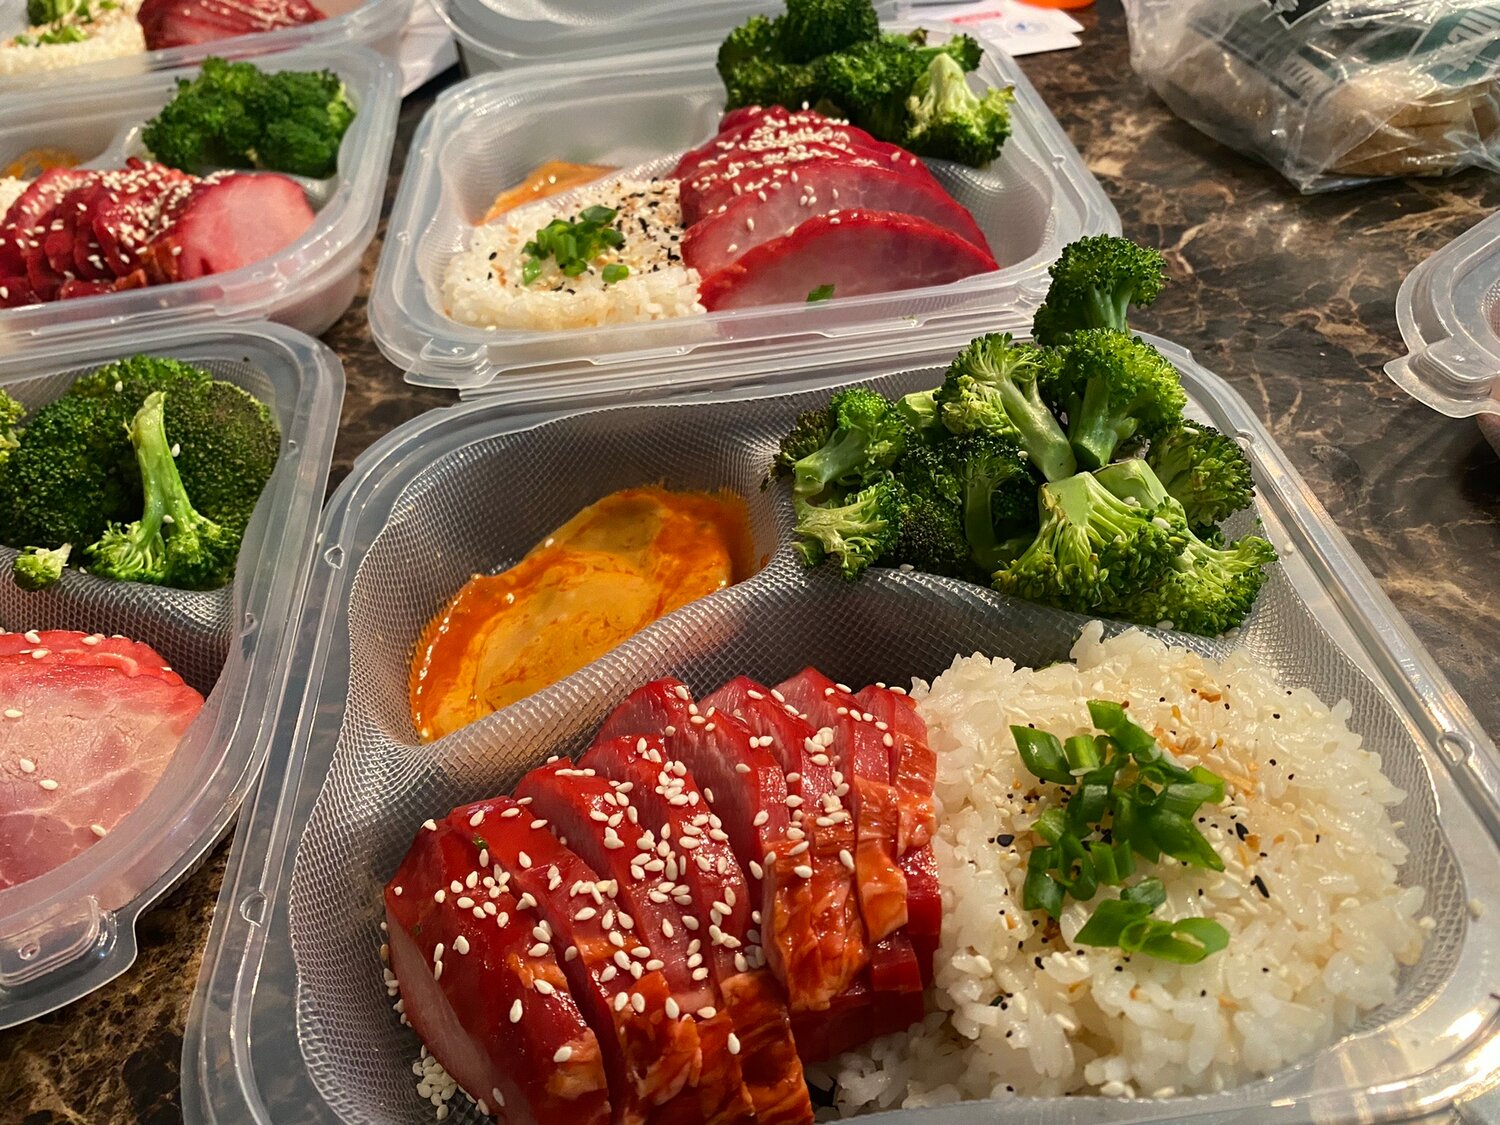 Whatcha Got Cookin! Menus change every week to include diverse options, including Char Siu Pork, roasted broccoli, sticky rice, and spicy mustard. Each meal is $17 per person, and can be delivered for a $5 fee.